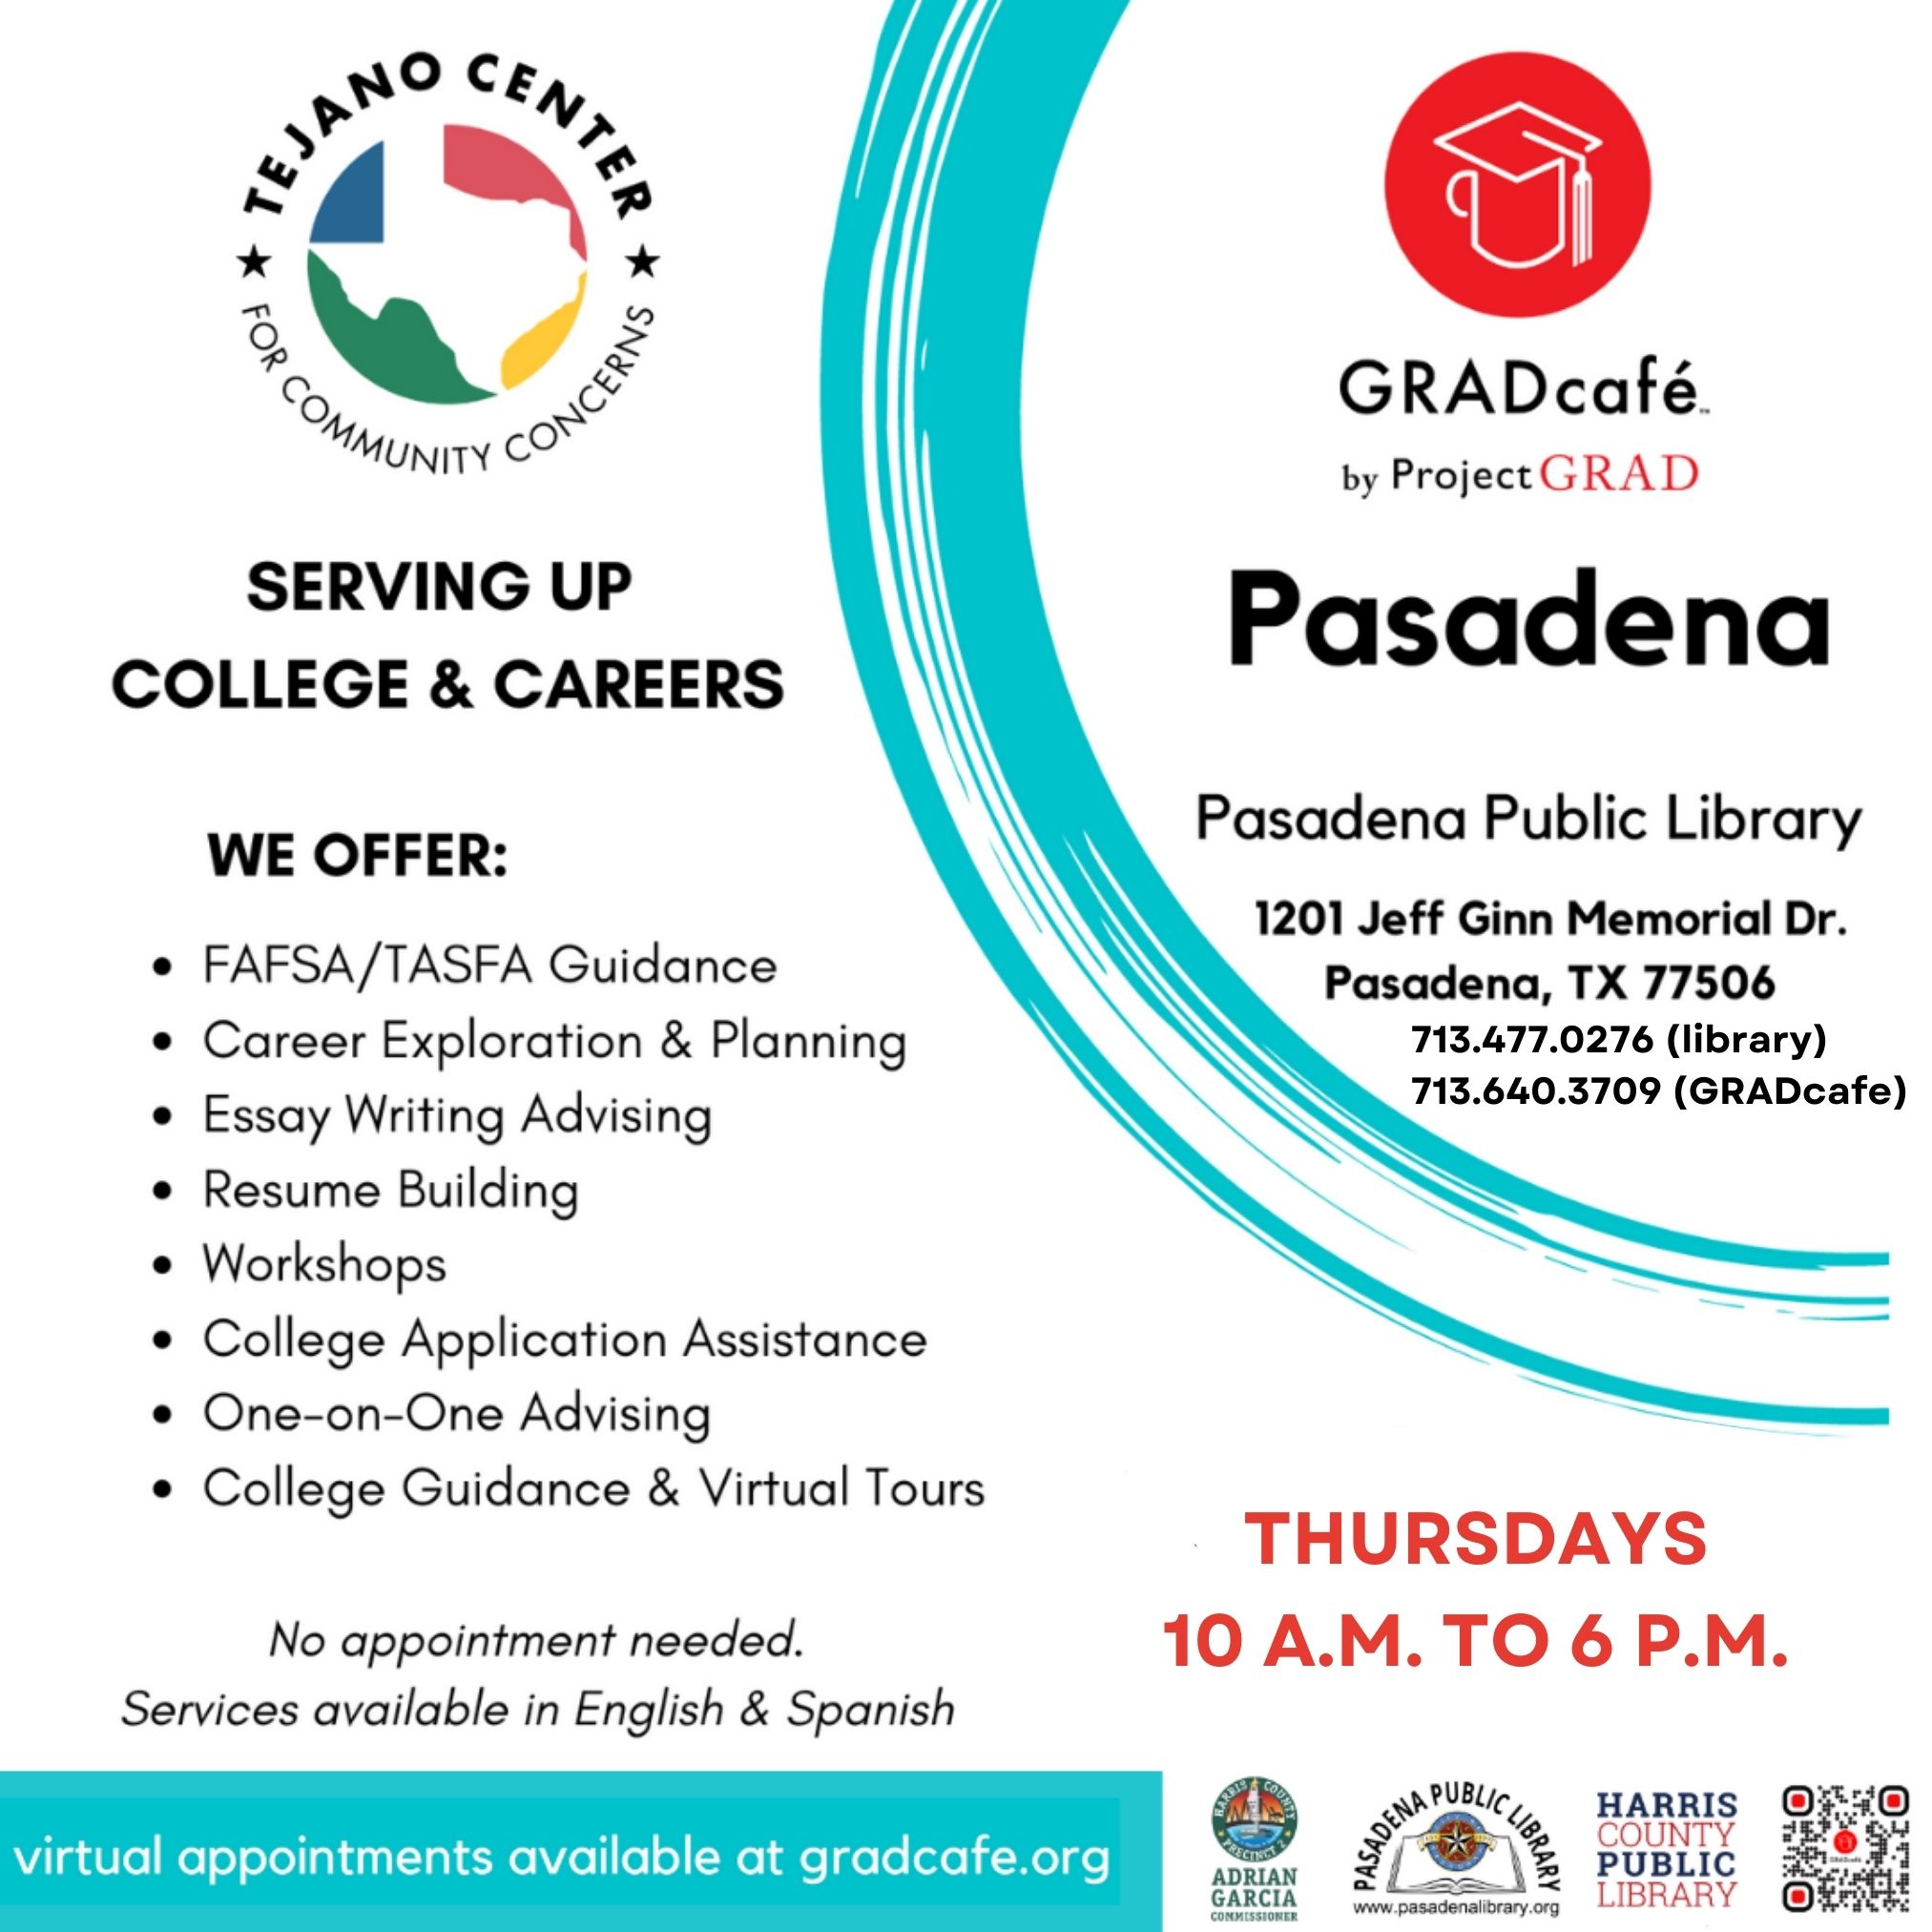 CENTRAL: GRADcafe Financial Aid, College and Career Help